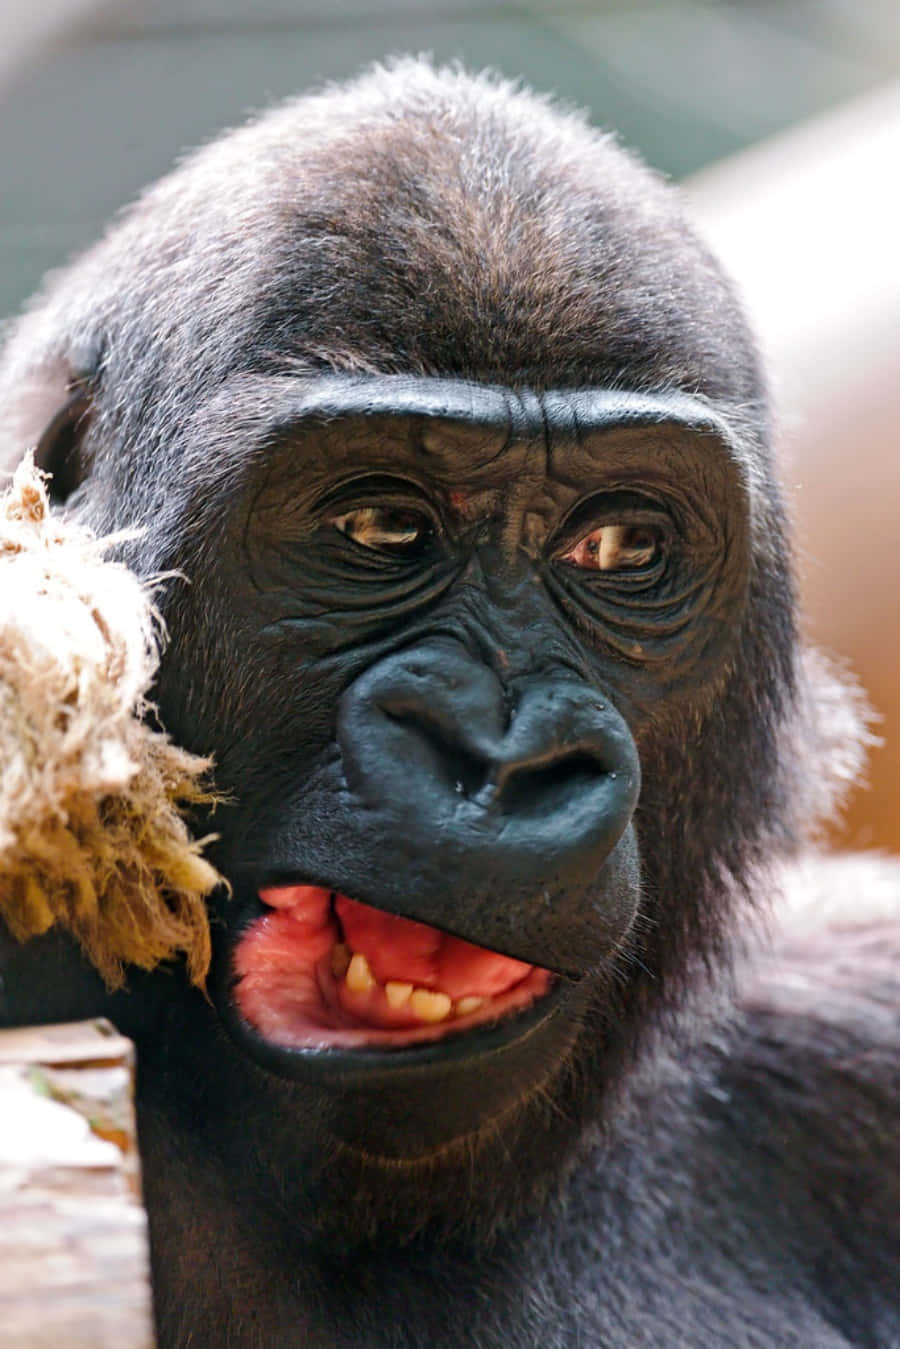 Funny Gorilla Grimace Face Pictures